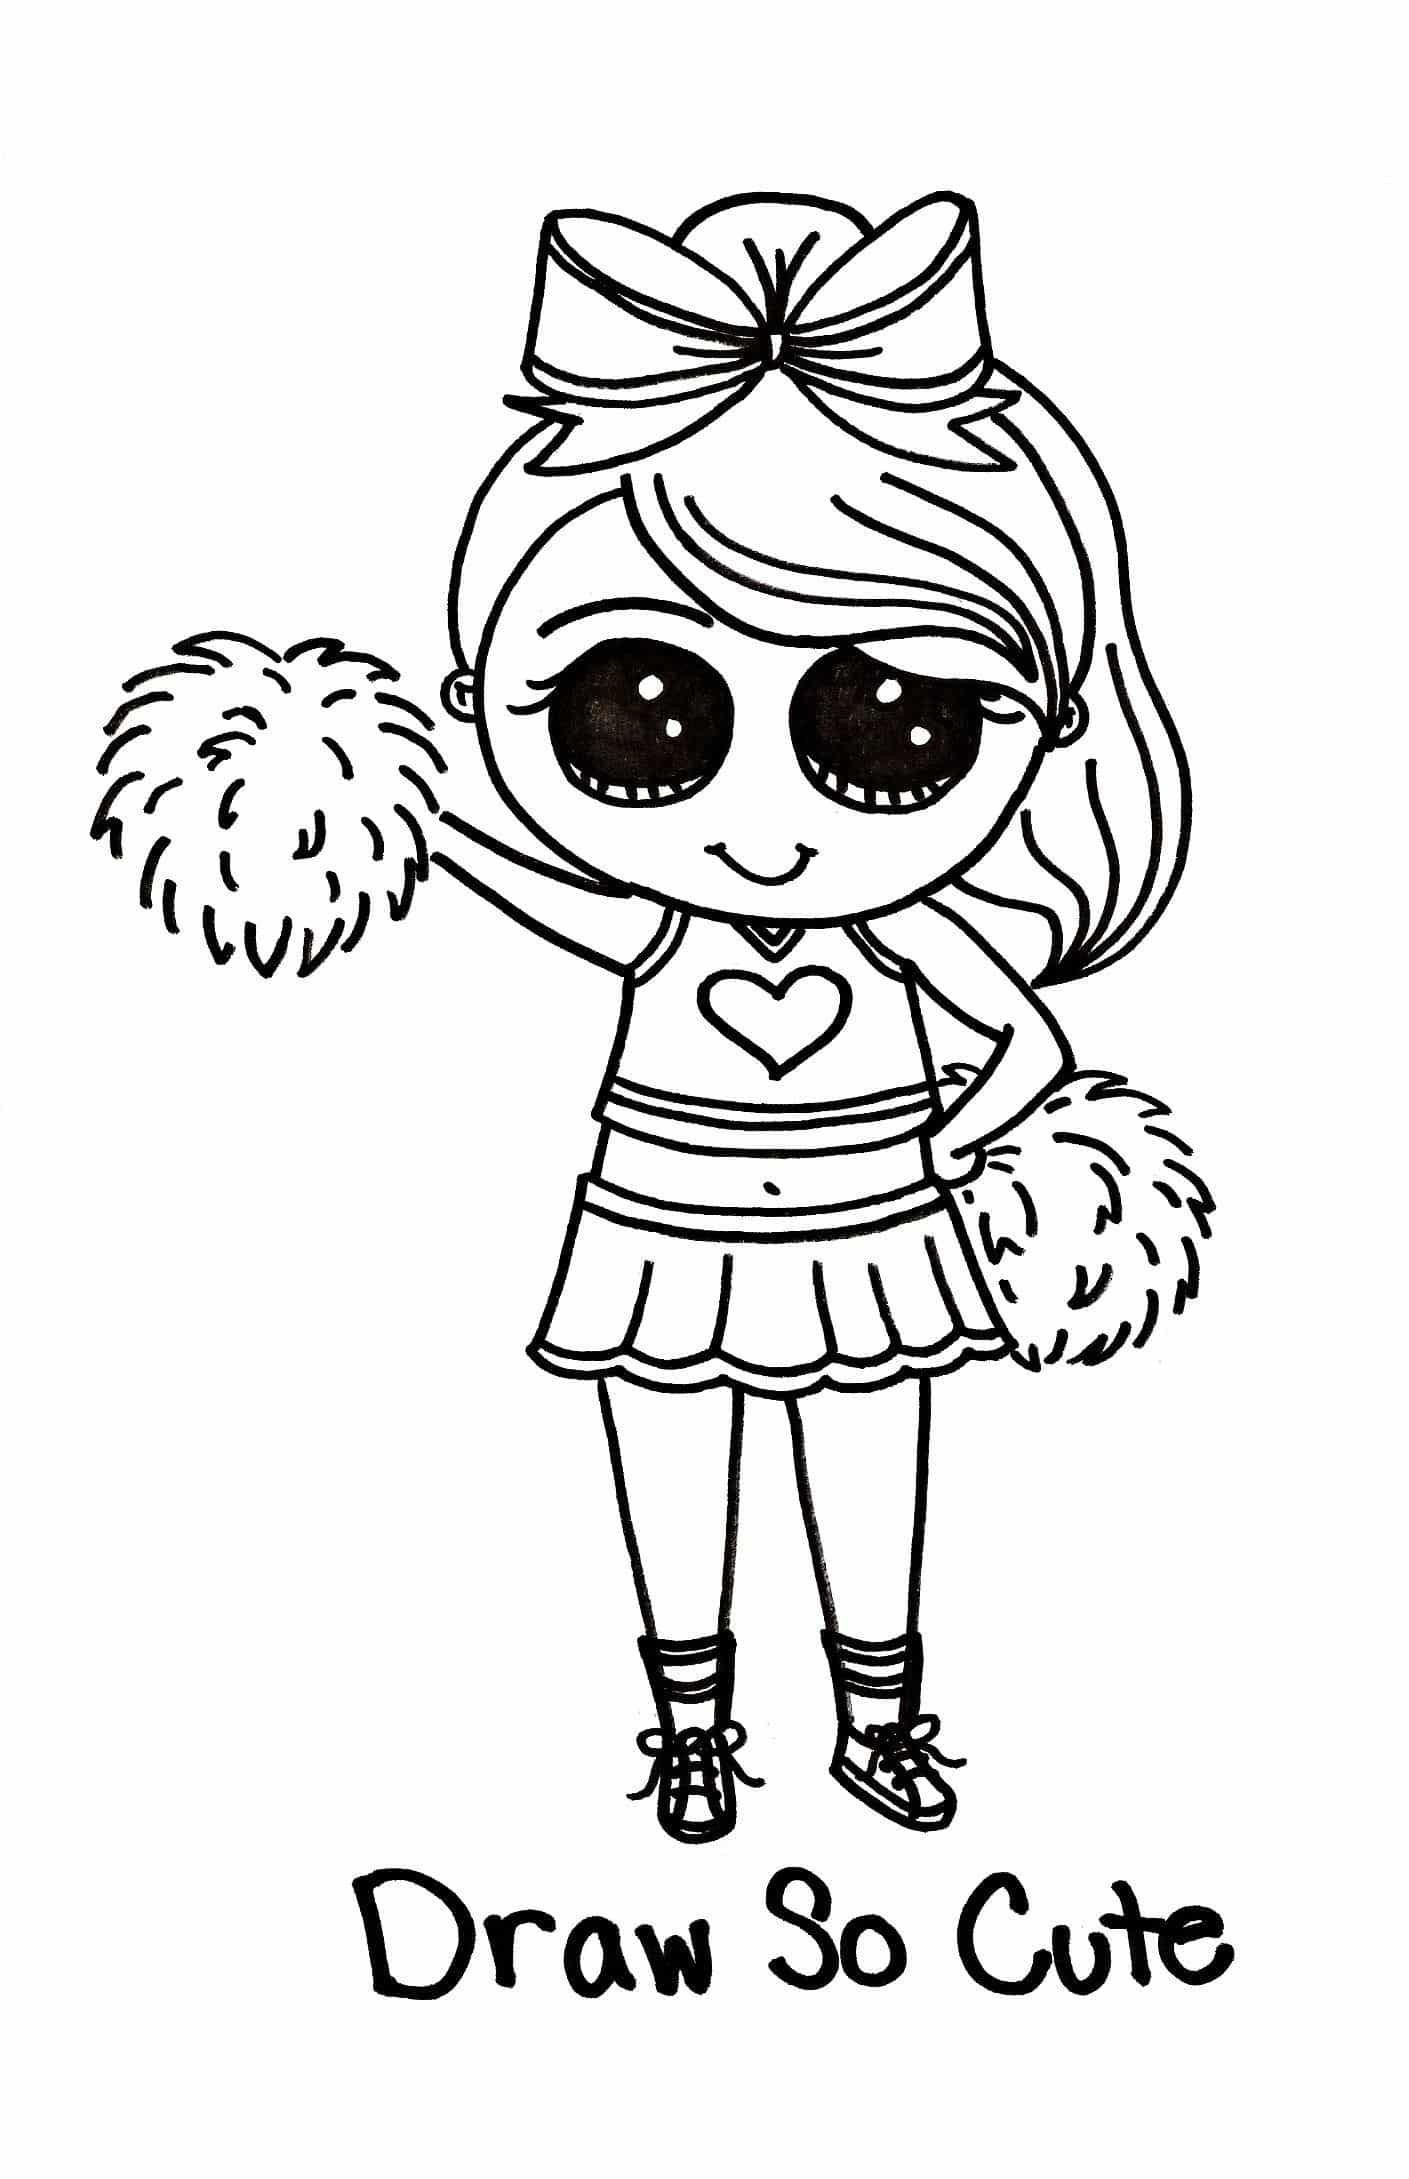 Kawaii Girls Coloring Pages
 Cute Coloring Pages For Easter New Easter Draw So Cute